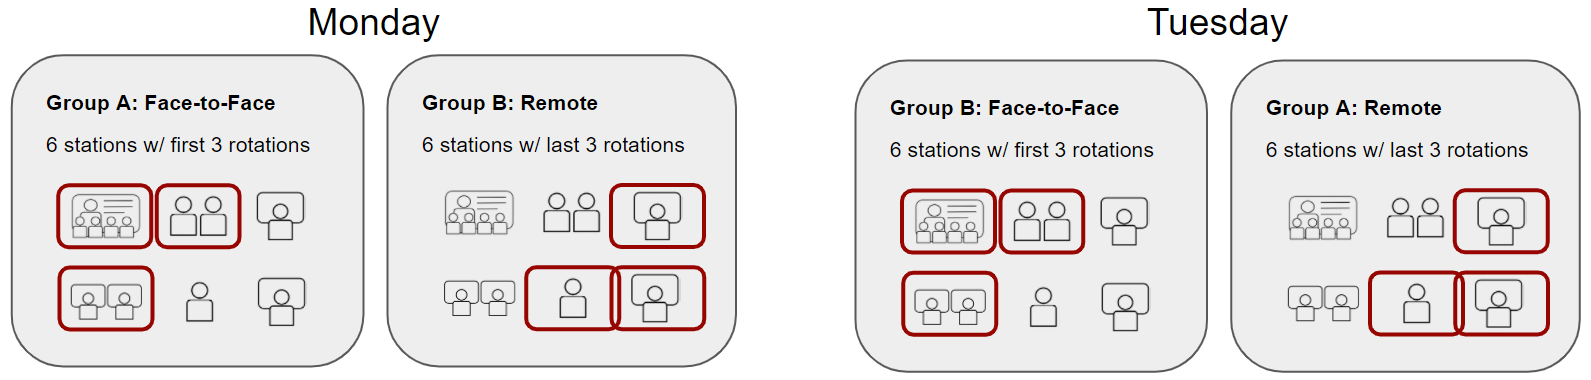 Station rotation: Save time, engage students in any K-12 classroom